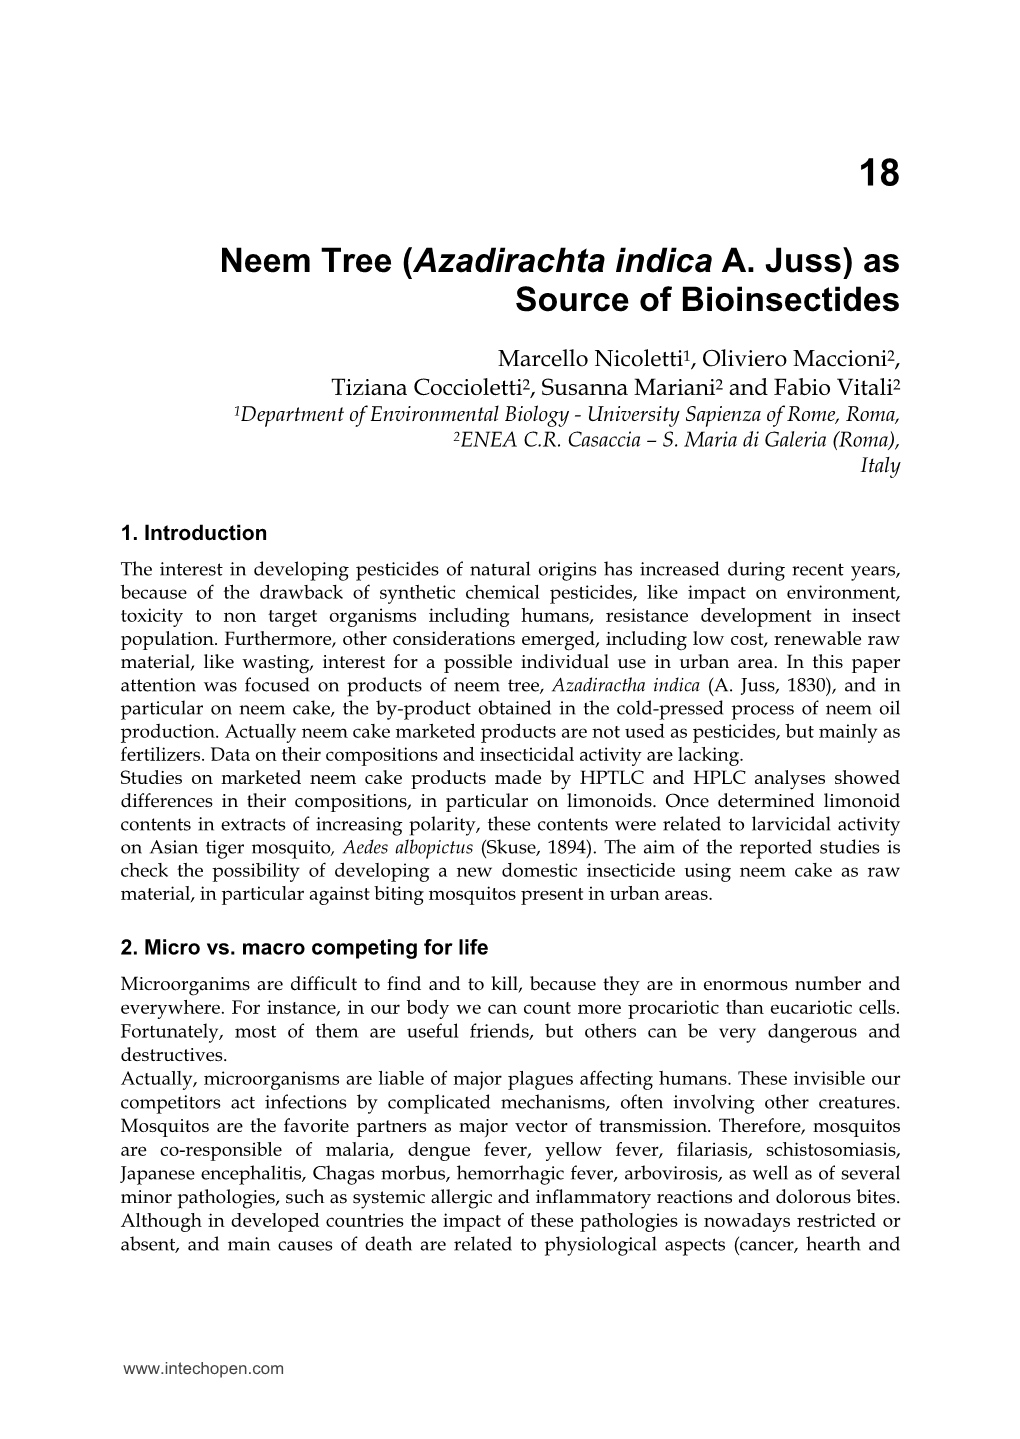 Neem Tree (Azadirachta Indica A. Juss) As Source of Bioinsectides